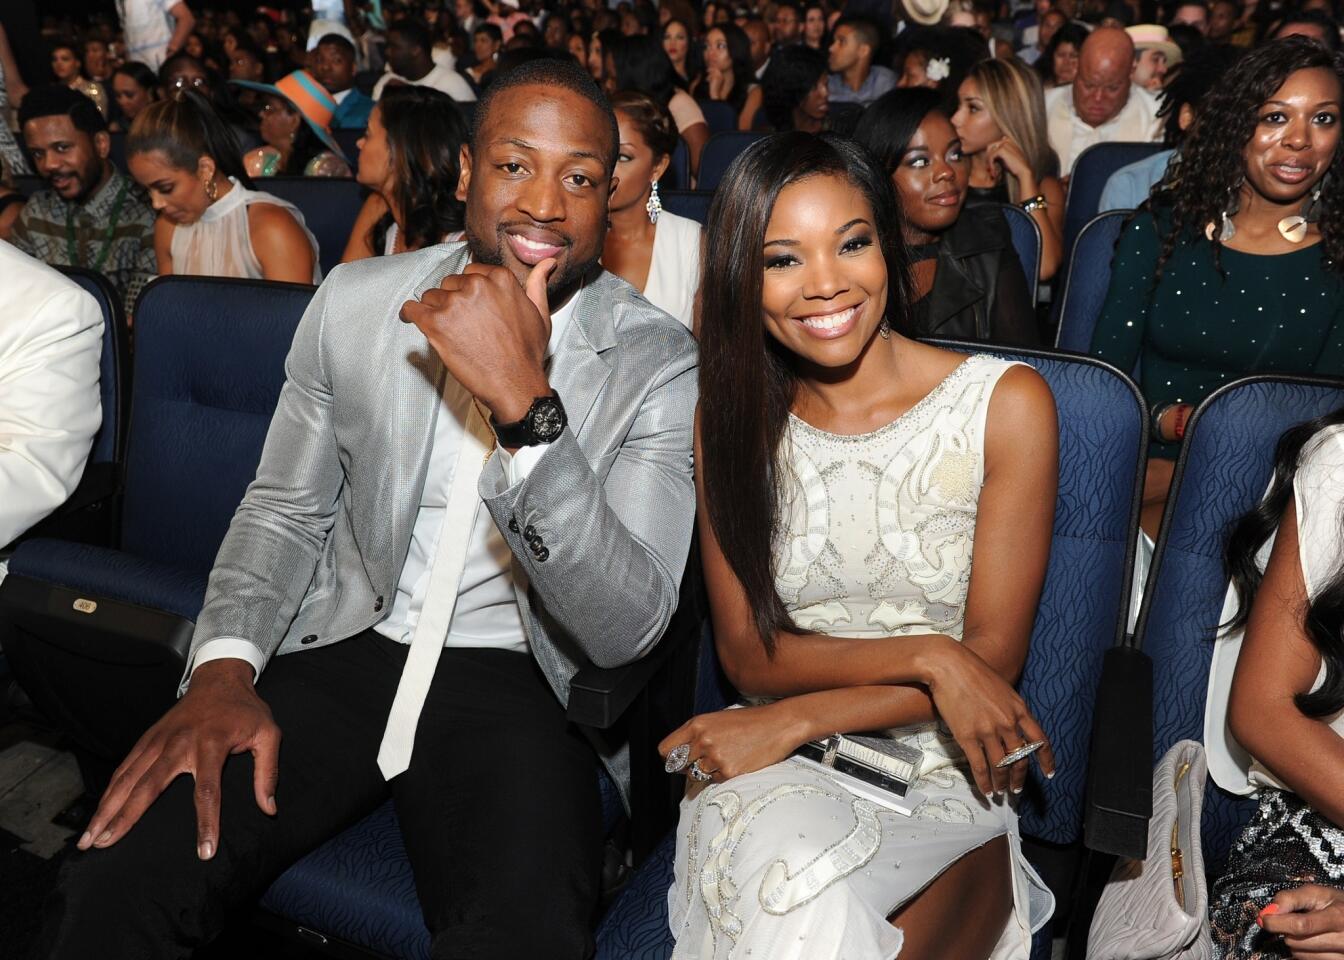 Baby drama leaks after Dwyane Wade and Gabrielle Union's engagement